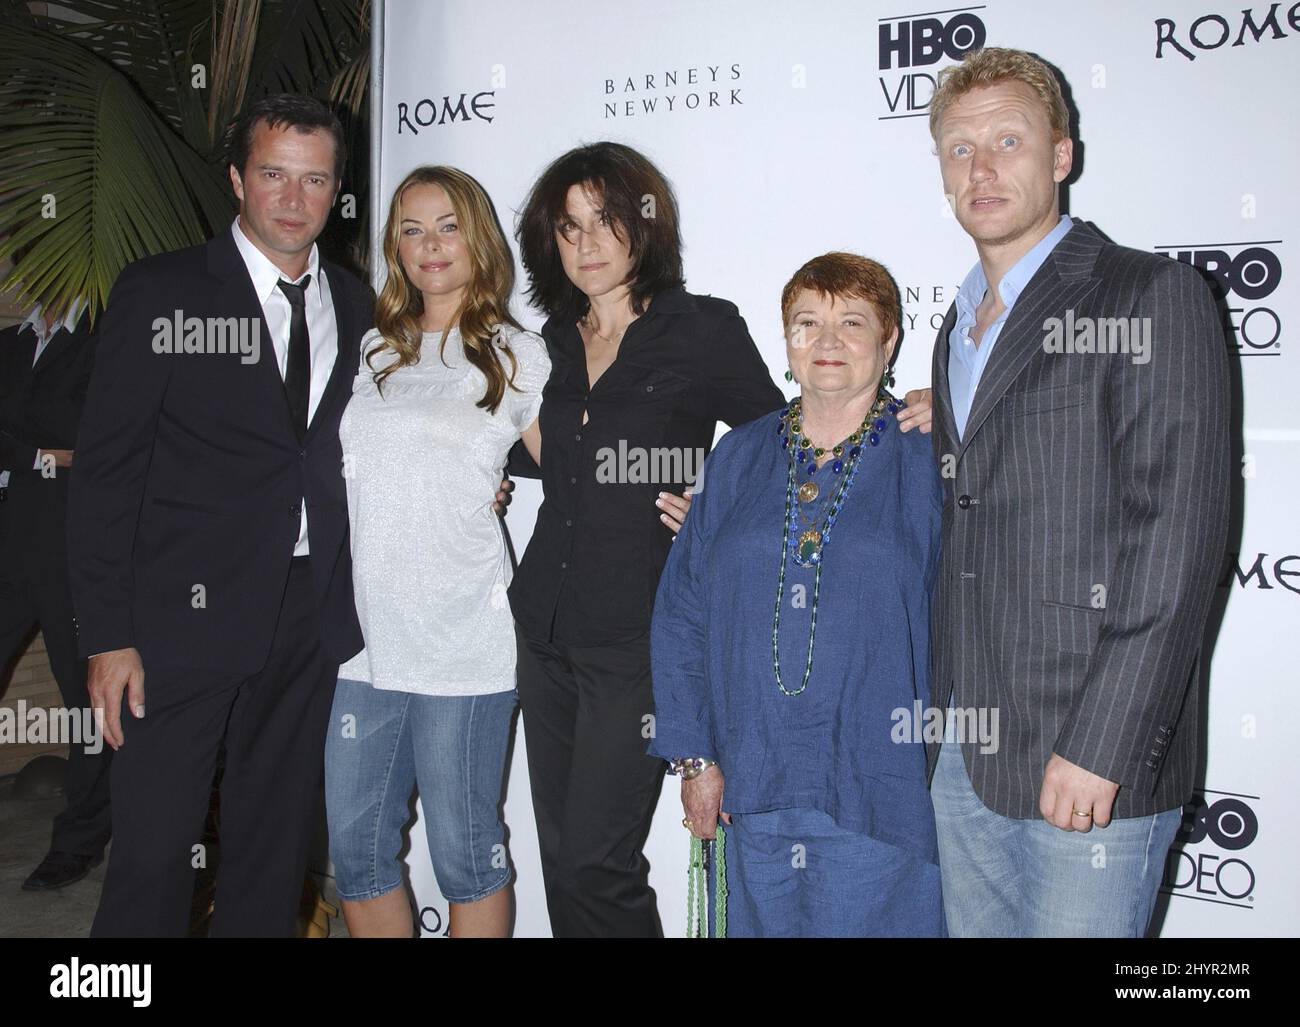 James Purefoy, Polly Walker & Kevin McKidd attend the DVD release of 'Rome' in Beverly Hills, California. Picture: UKPress Stock Photo